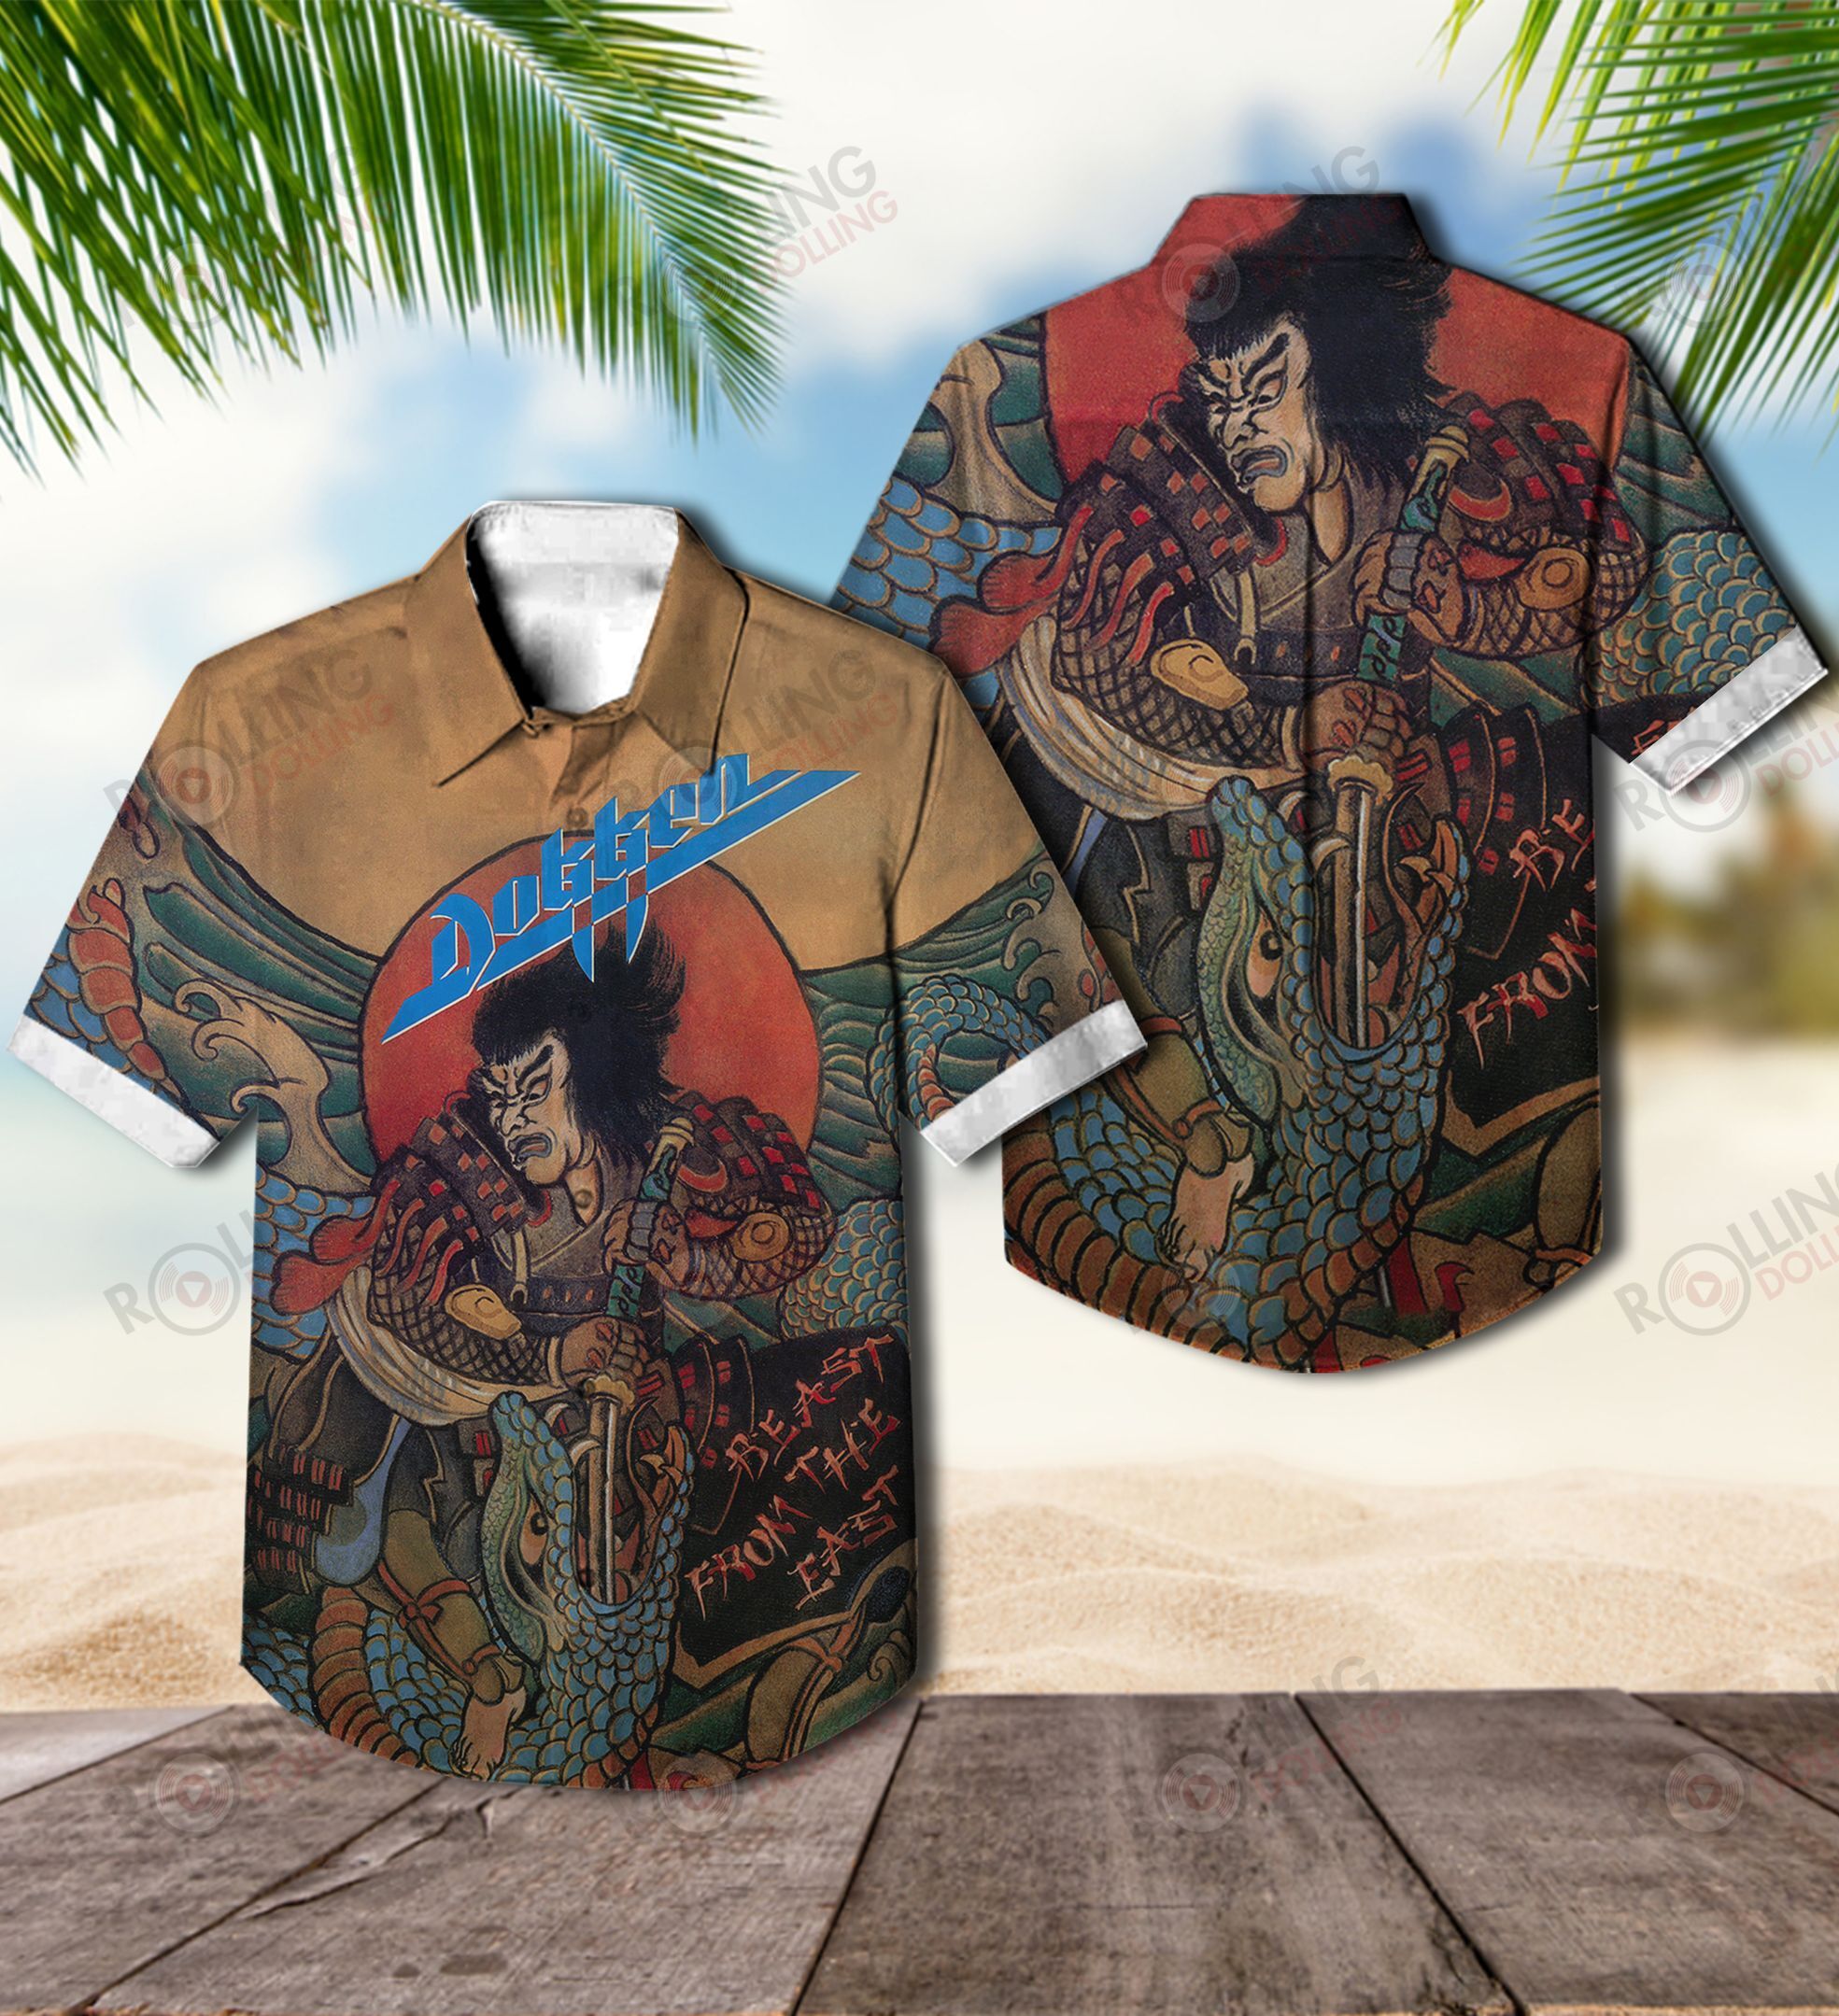 For summer, consider wearing This Amazing Hawaiian Shirt shirt in our store 117